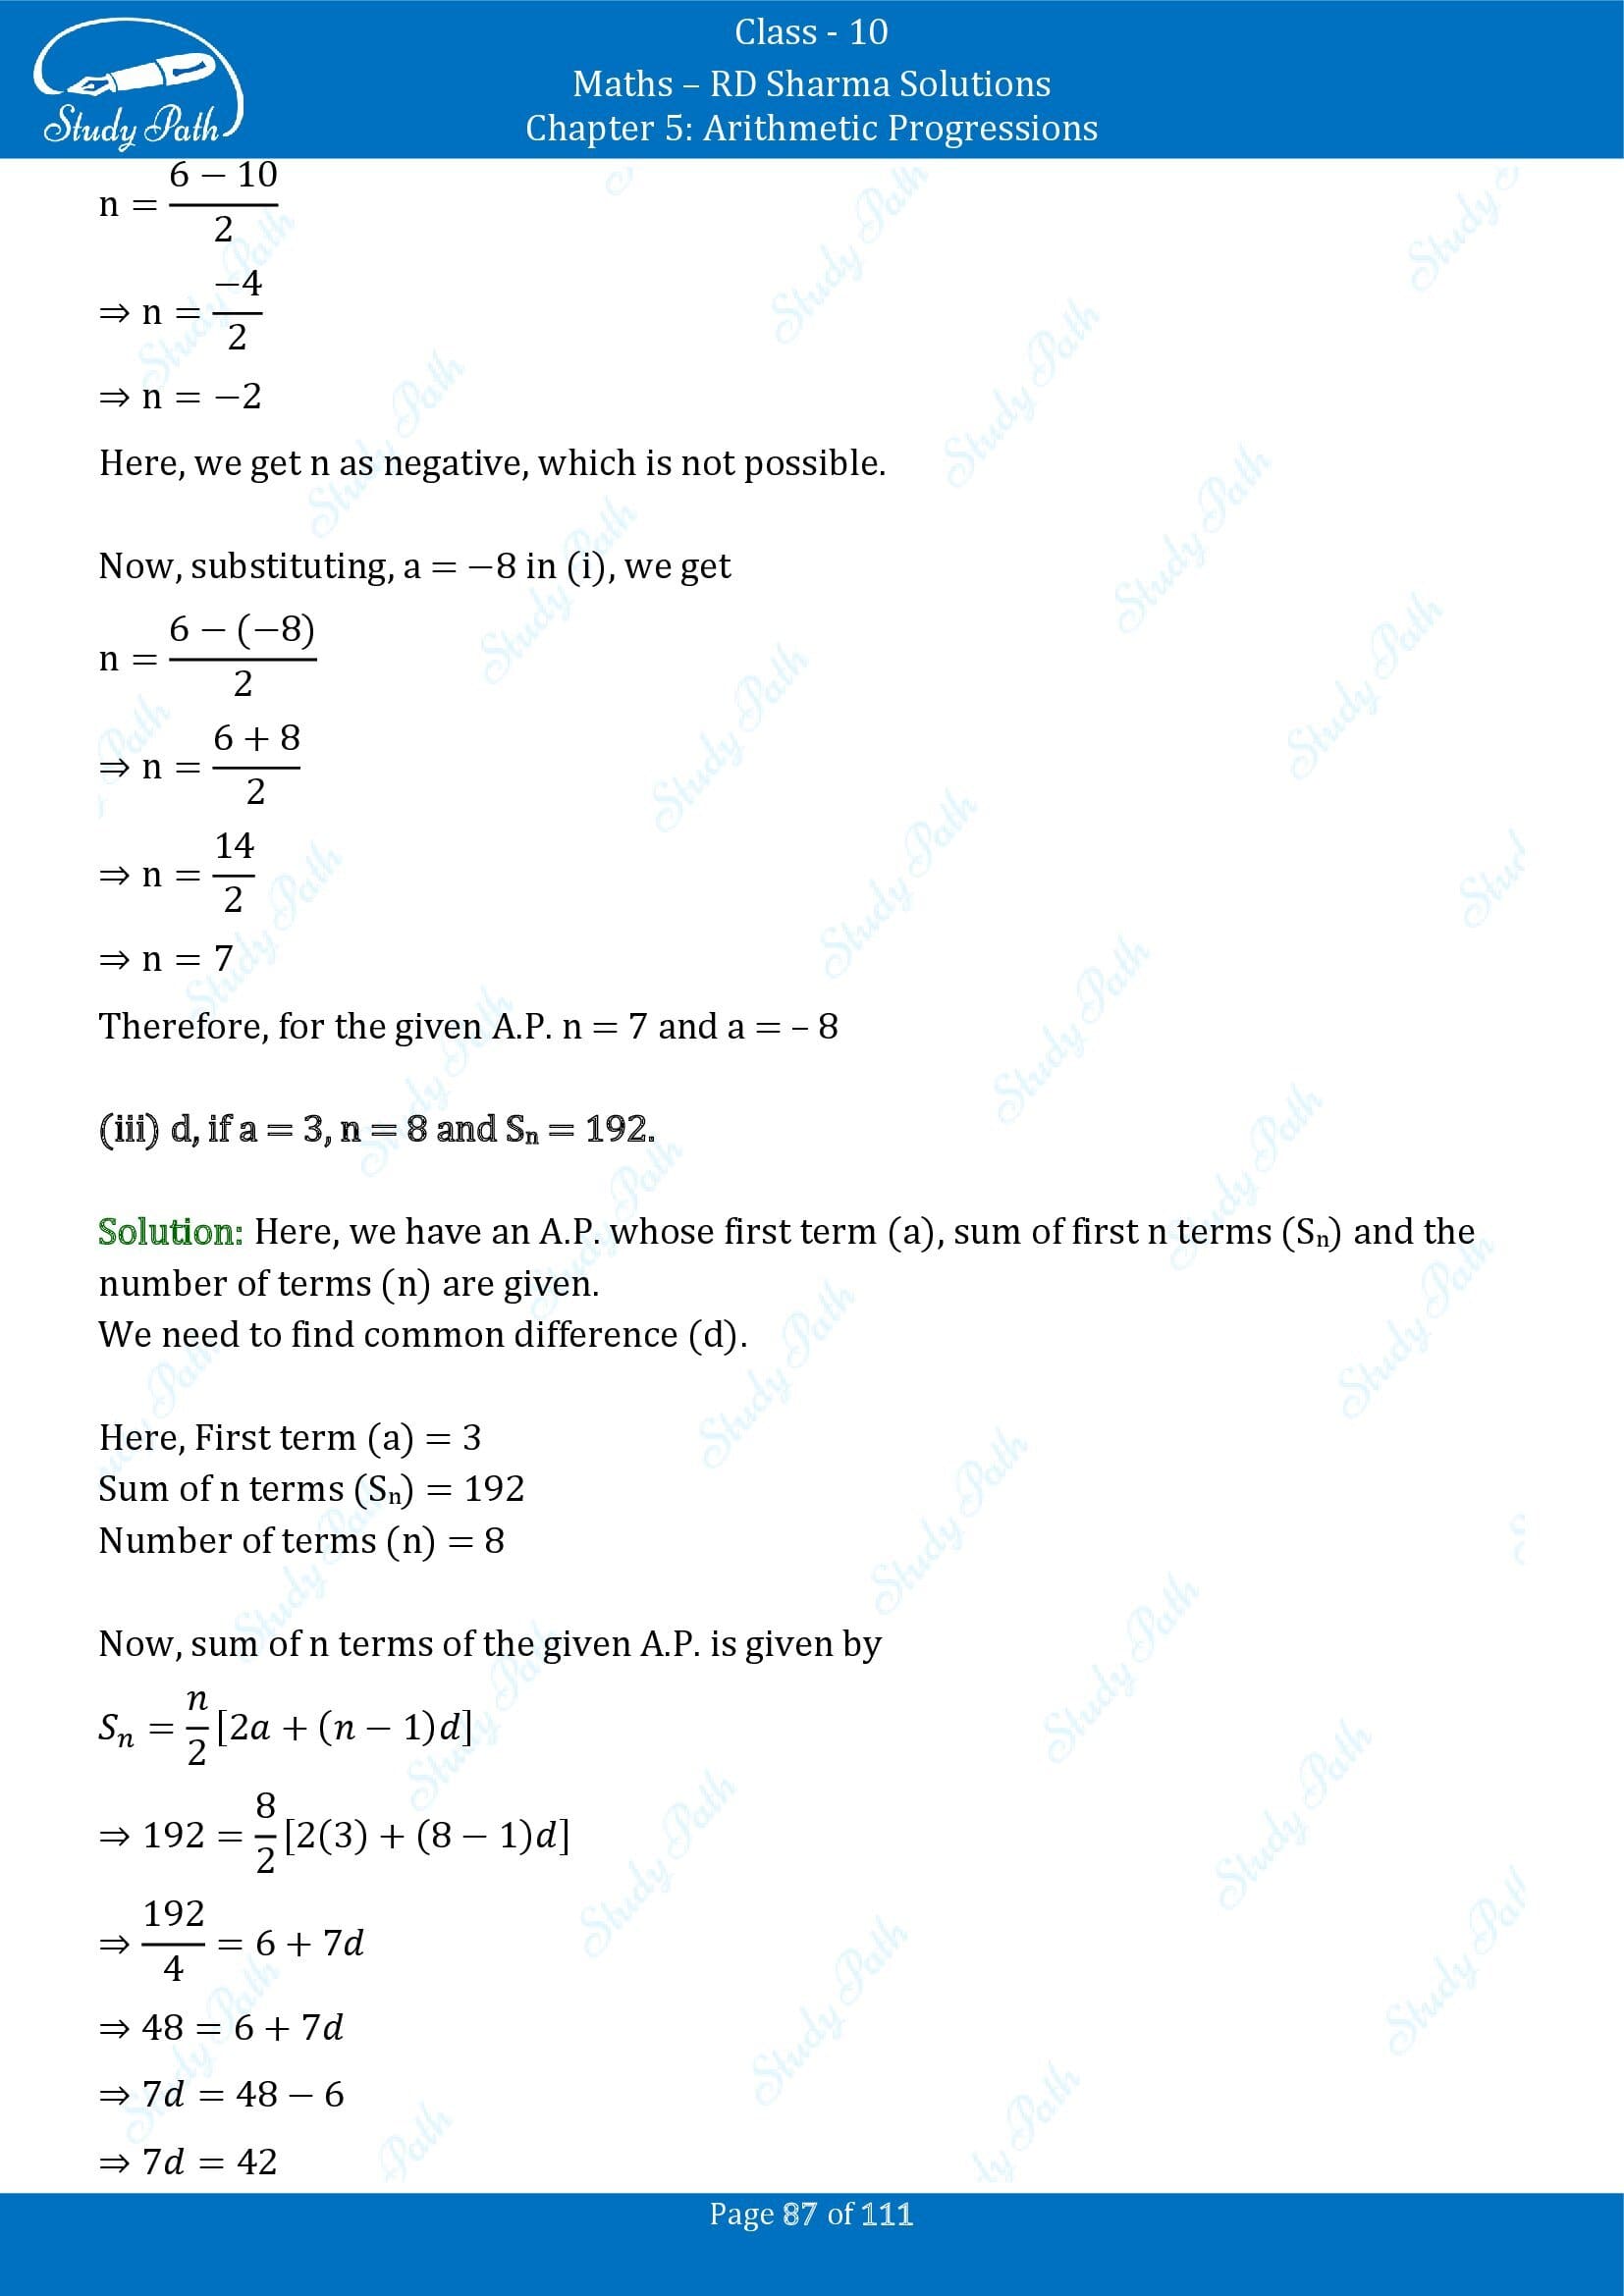 RD Sharma Solutions Class 10 Chapter 5 Arithmetic Progressions Exercise 5.6 00087